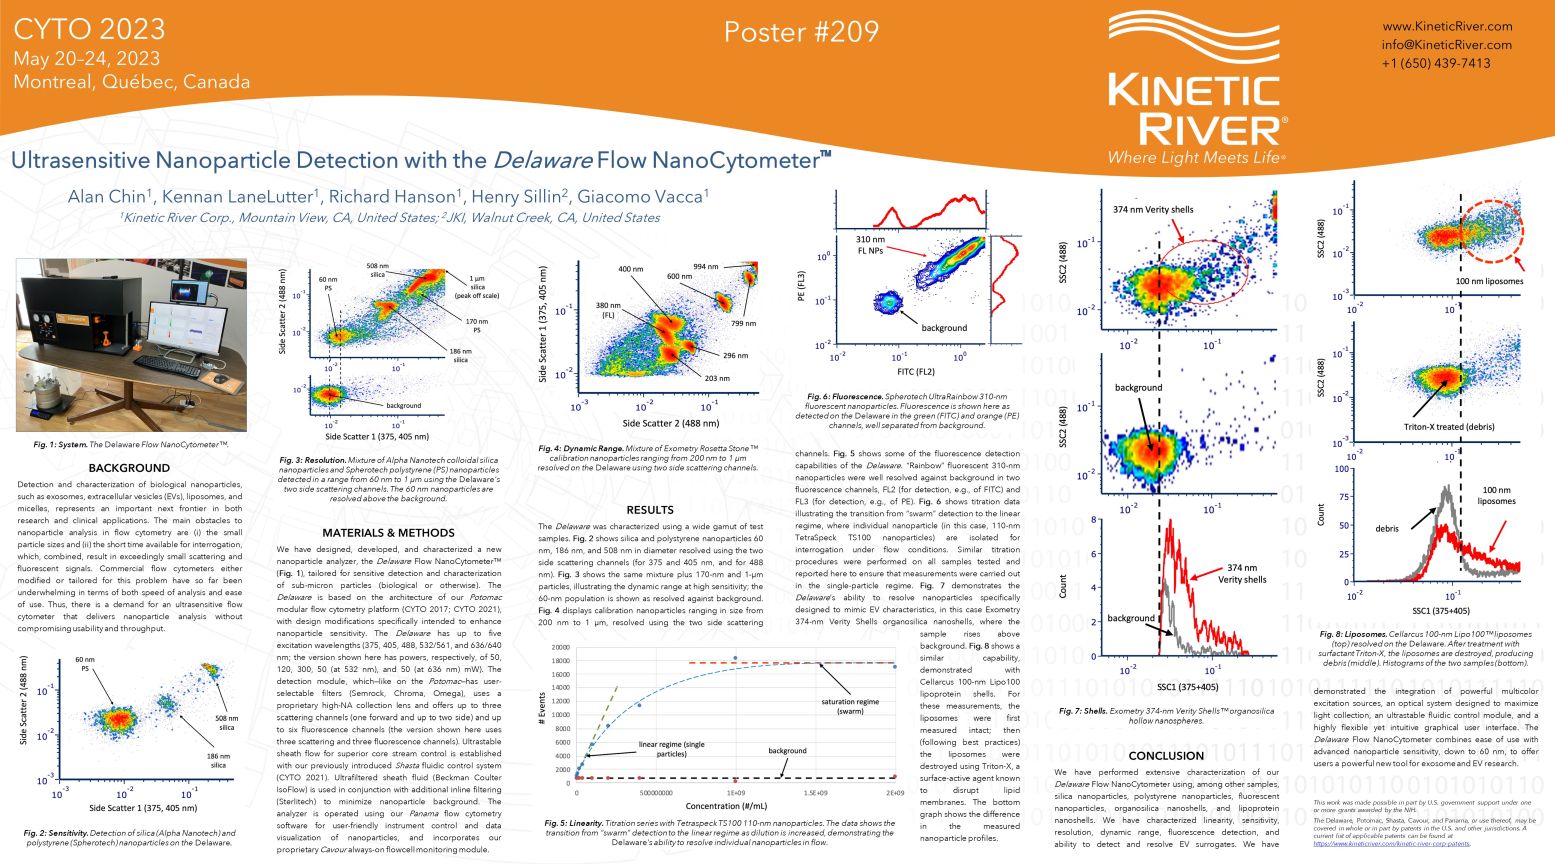 Kinetic River To Present Poster At CYTO On Ultrasensitive Nanoparticle Detection